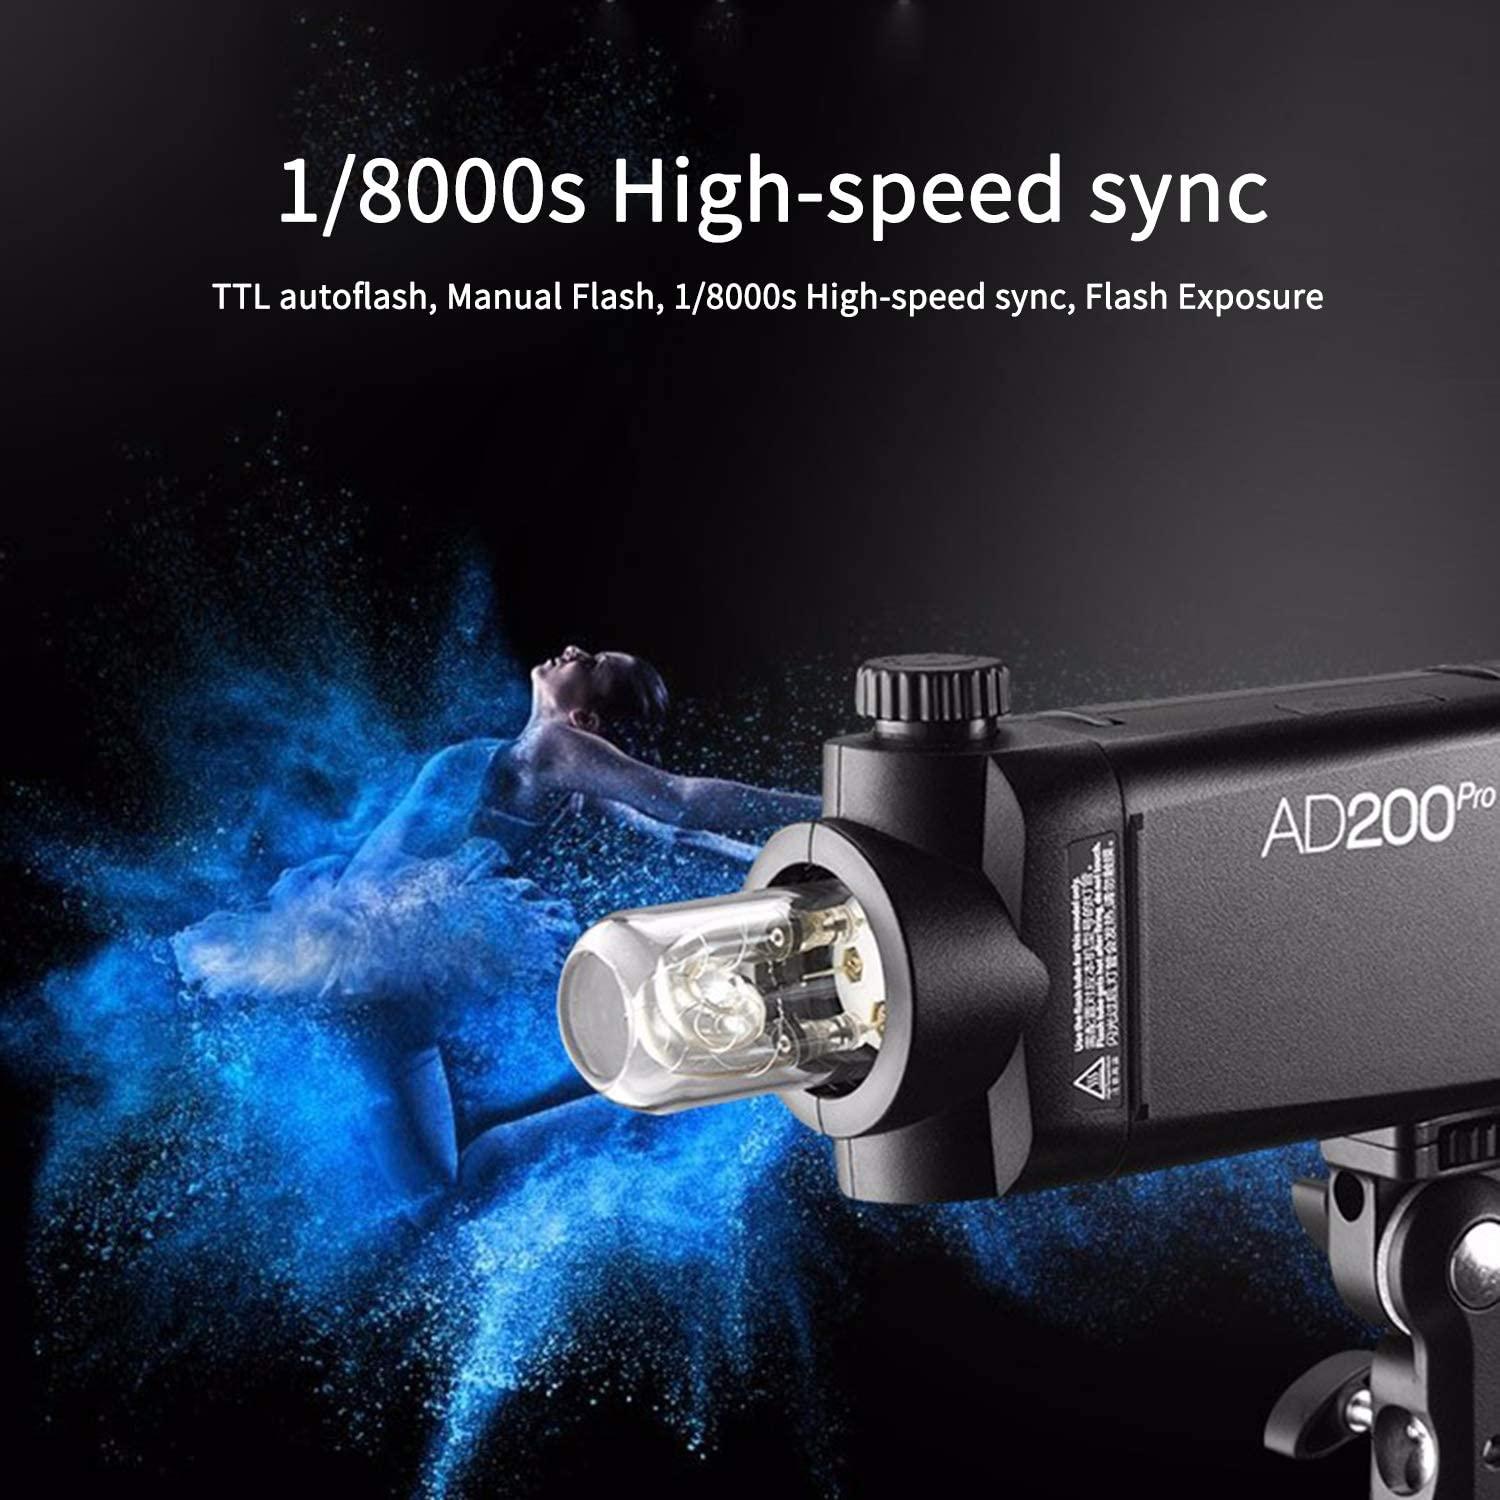 DON'T BUY THE AD200 PRO! BUY THIS GODOX LIGHT INSTEAD!, Off Camera Flash